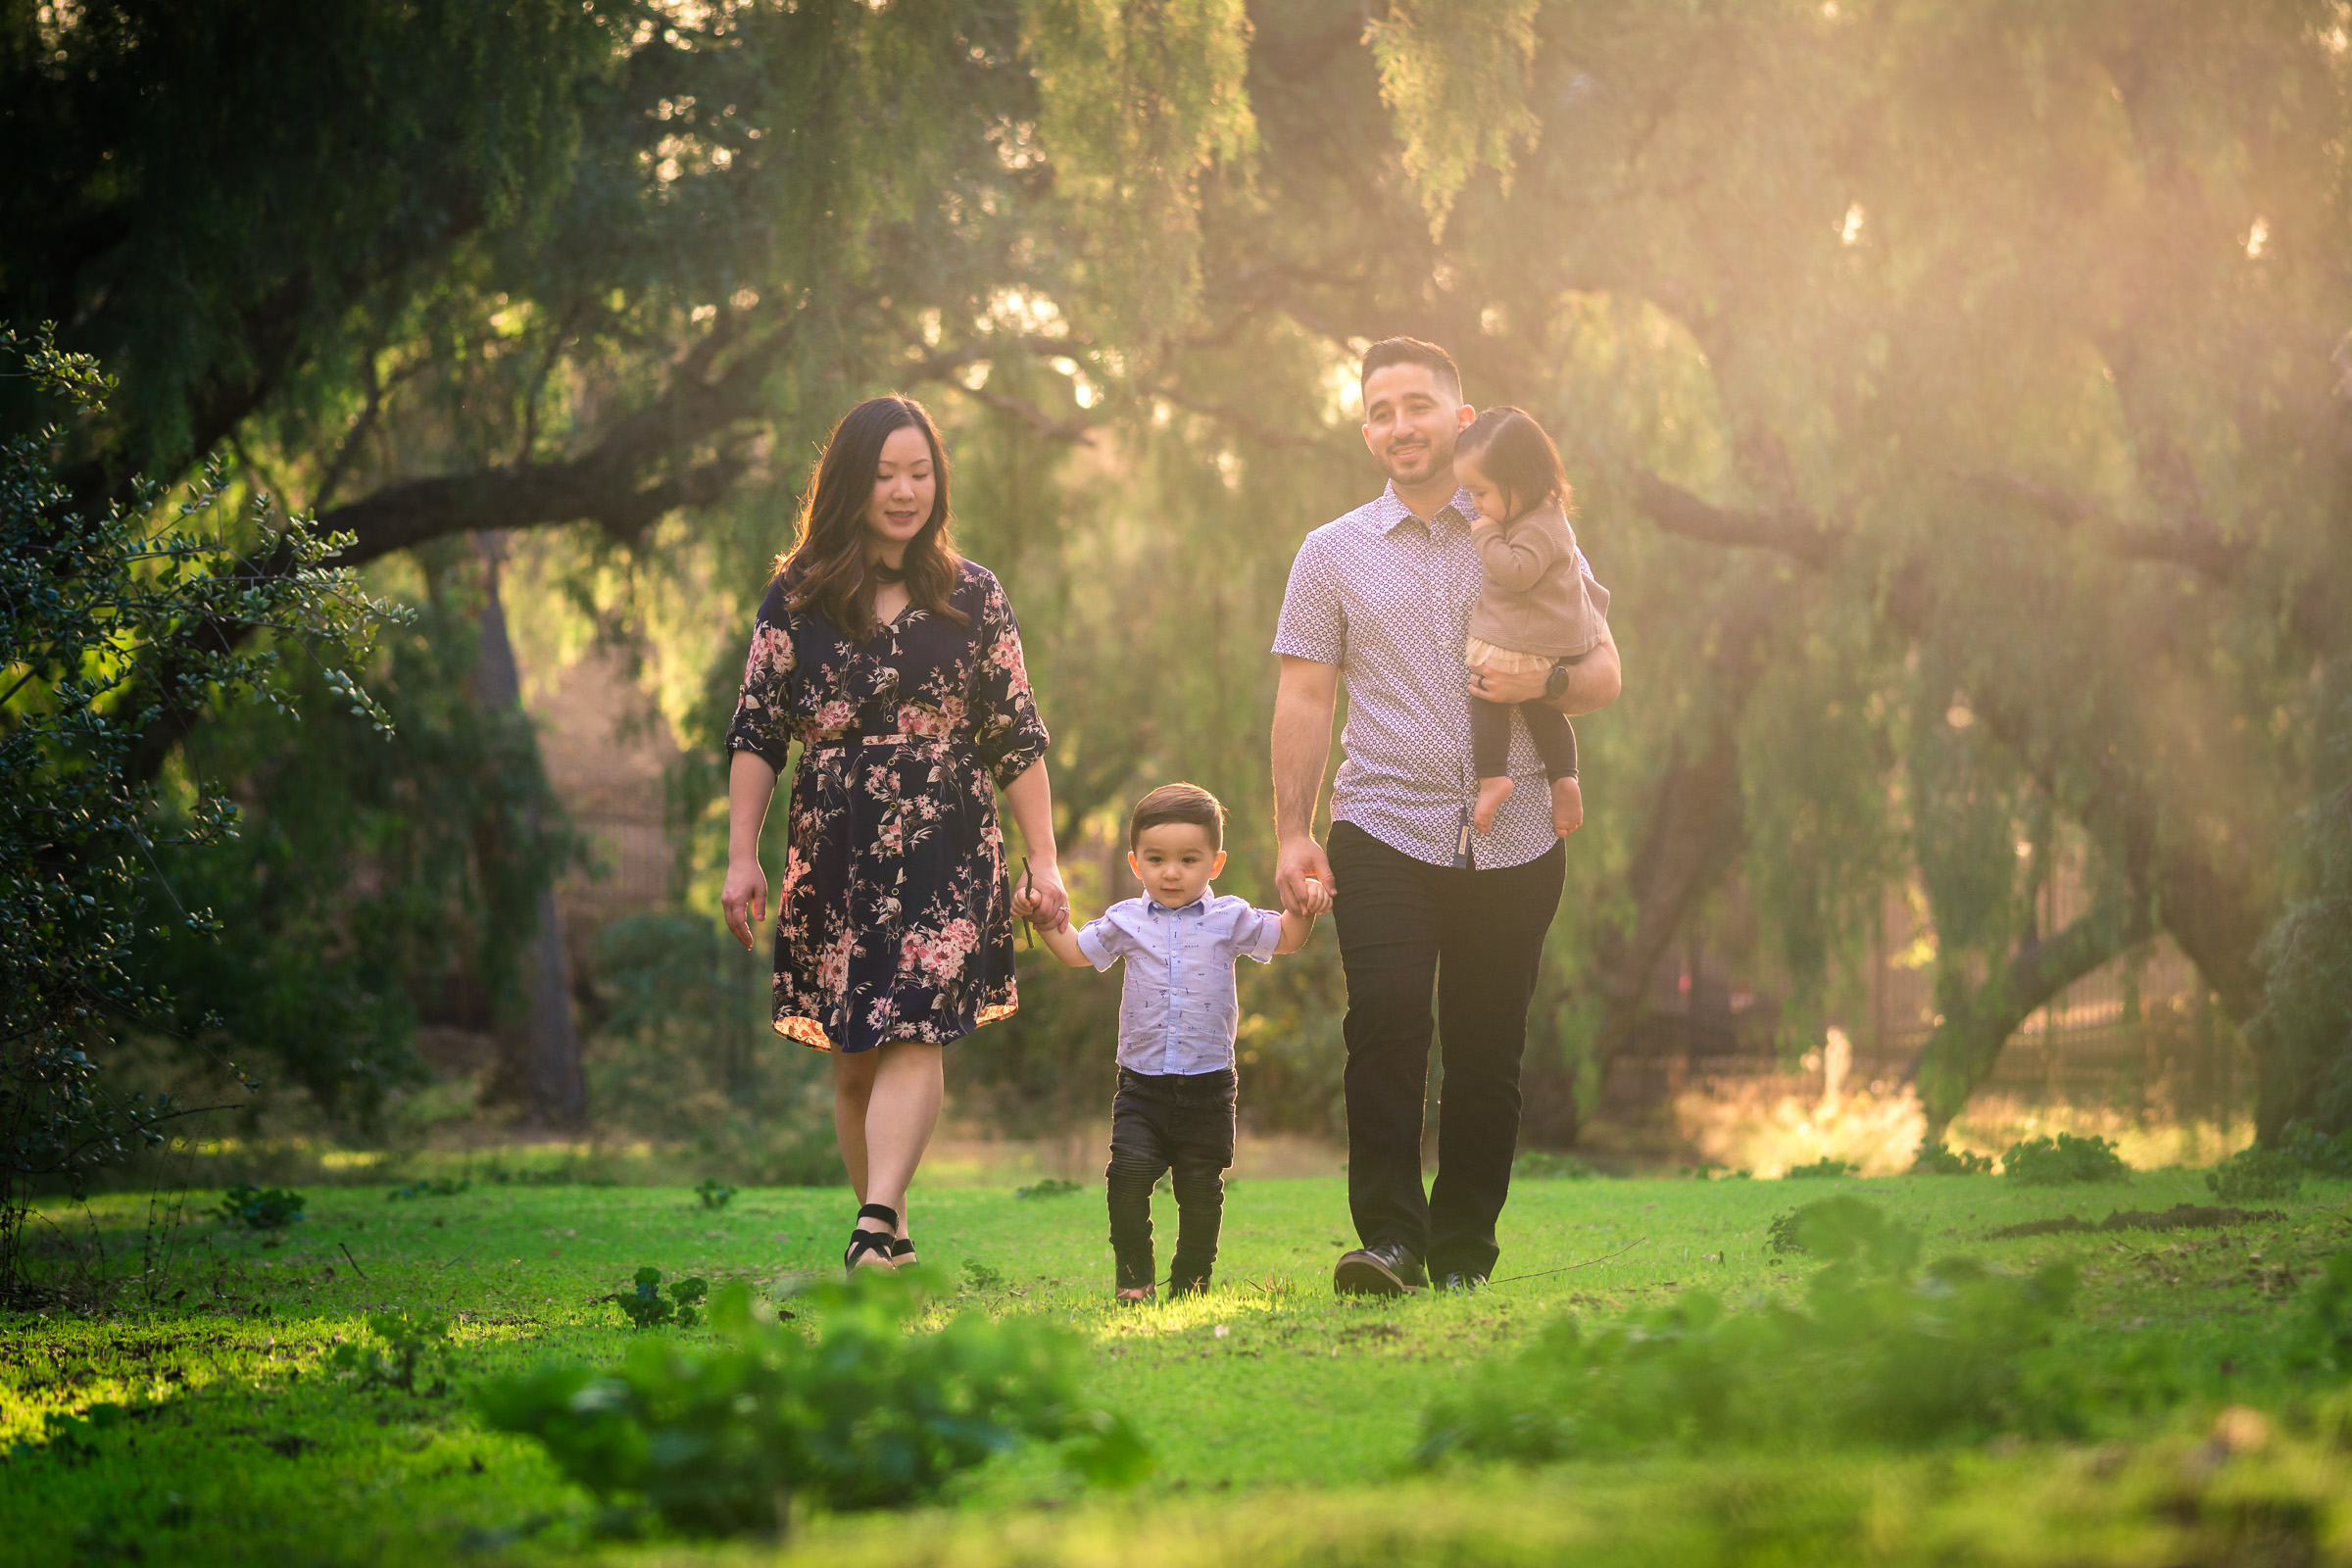 Candid photo of family walking during a Family portrait photo shoot in Fullerton on the Juanita Cooke Trail with vibrant green trees and grass and the golden hour sun